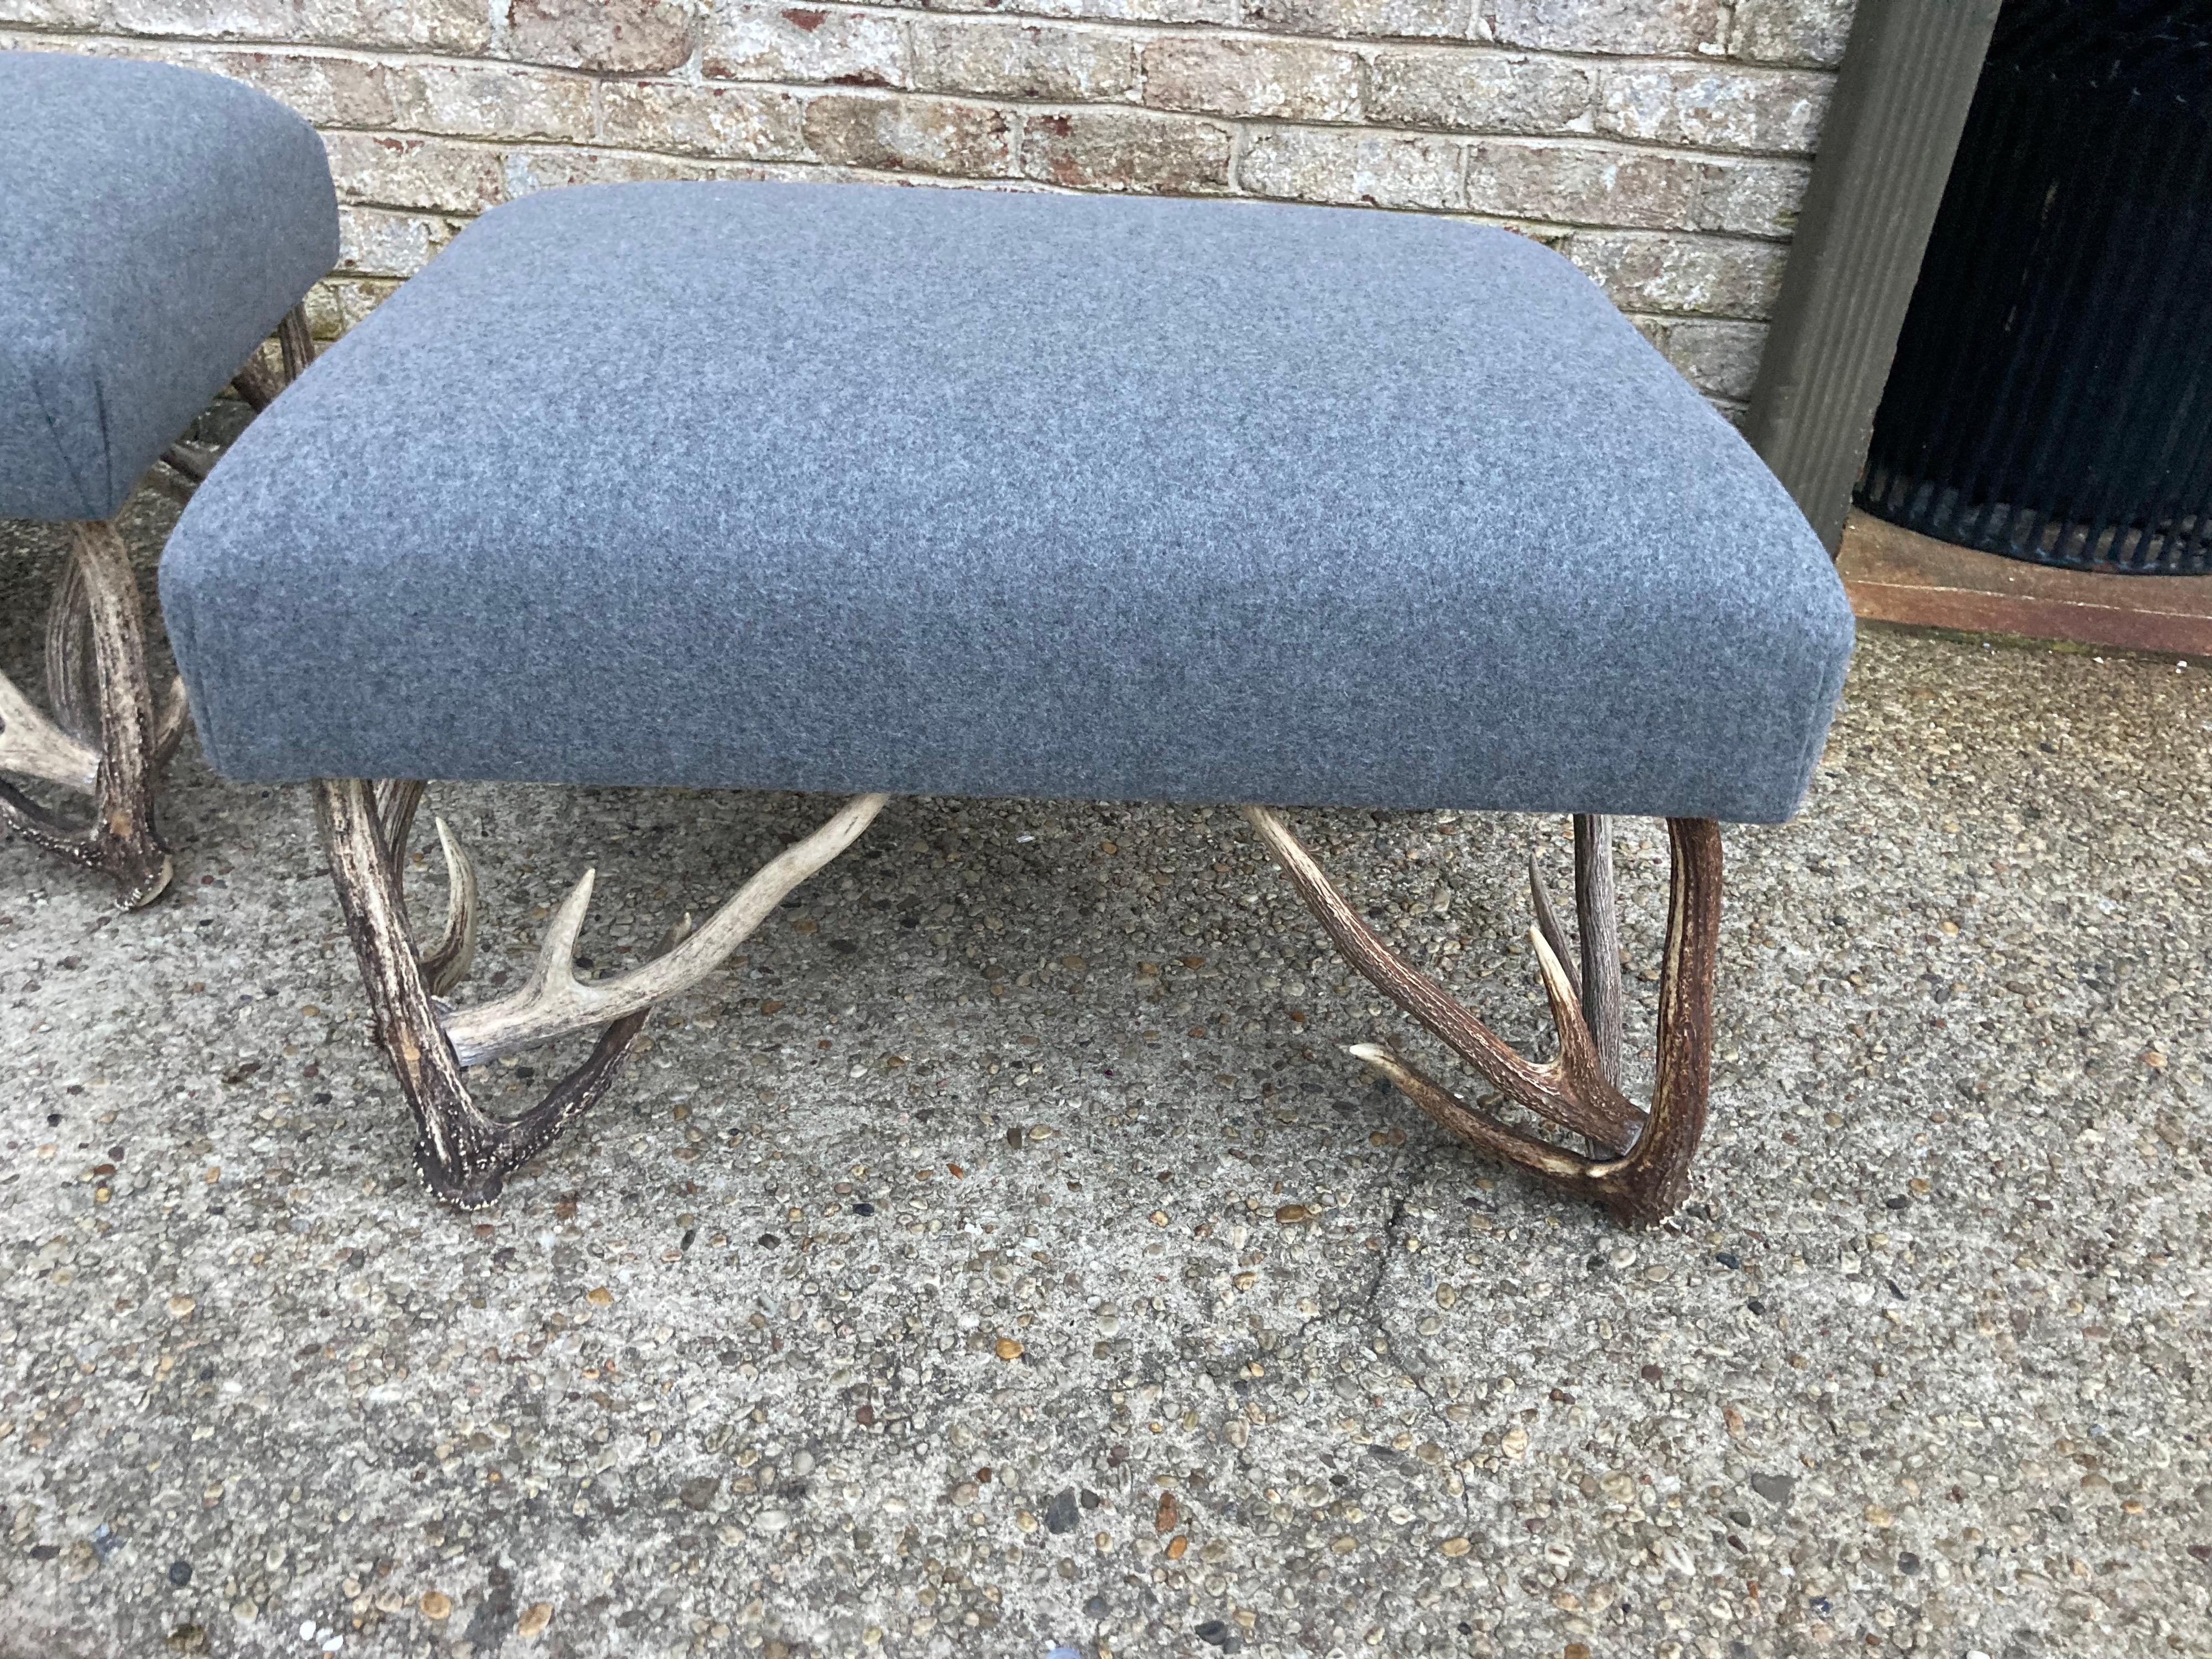 Pair of deer antler based ottomans or benches newly reupholstered in gray flannel.